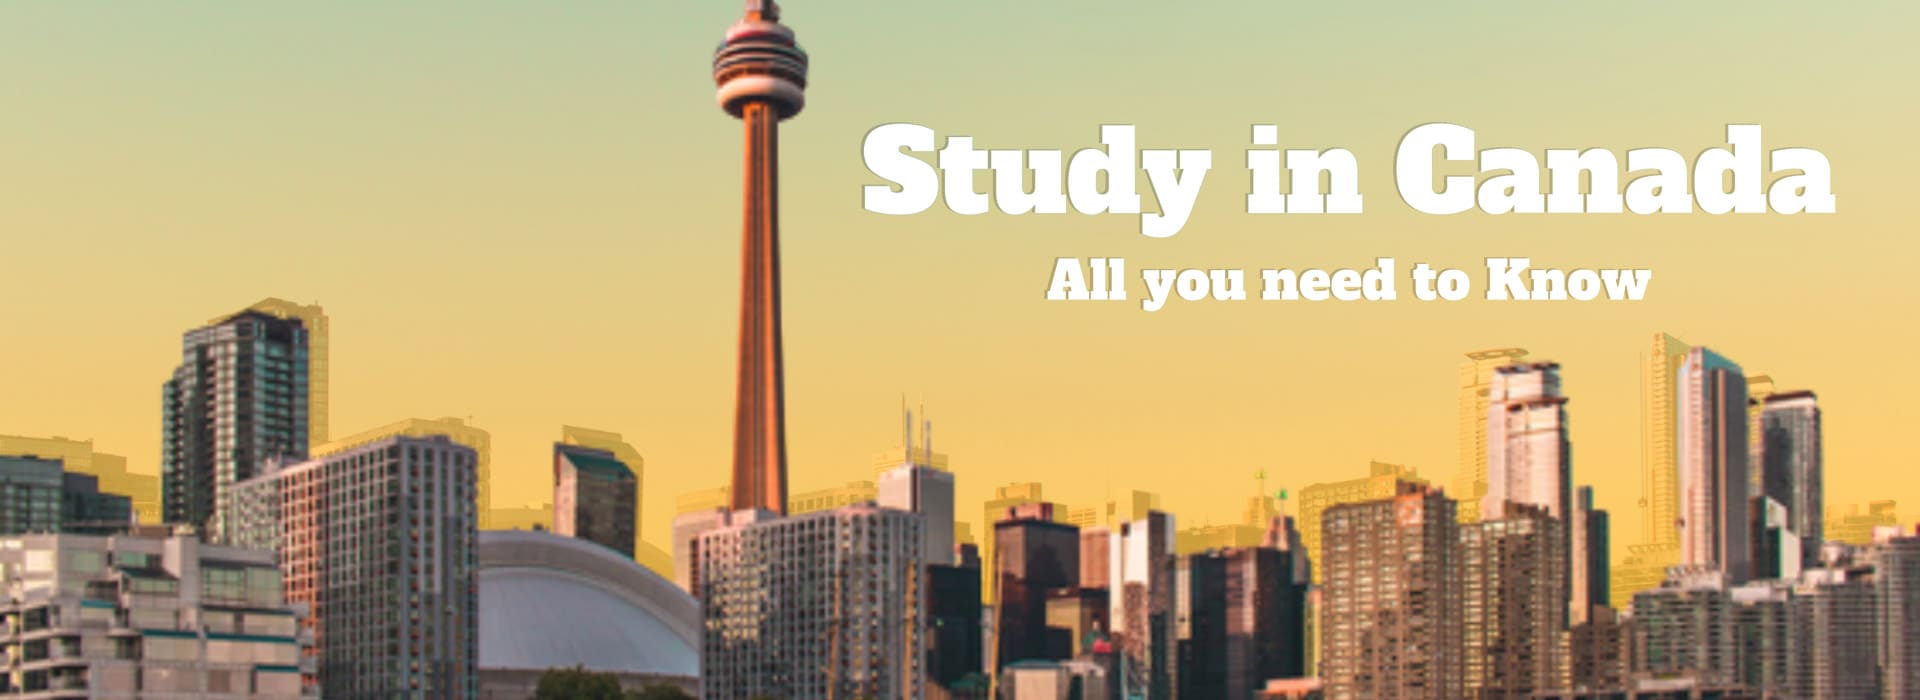 Study in Canada: All you need to Know.